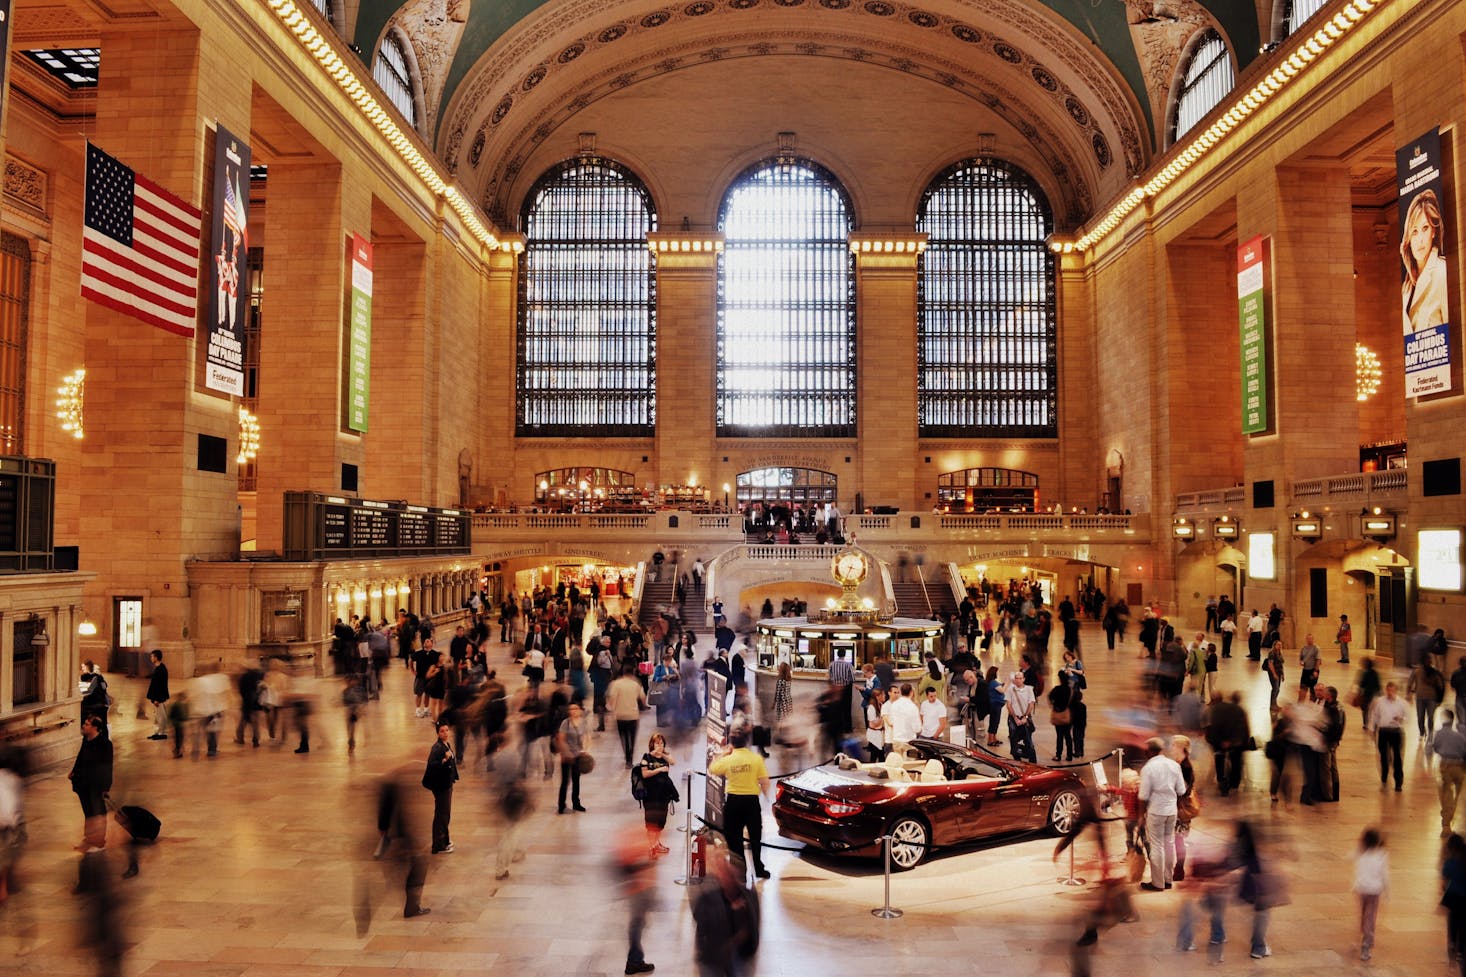 Main hall at Grand Central Station, New York